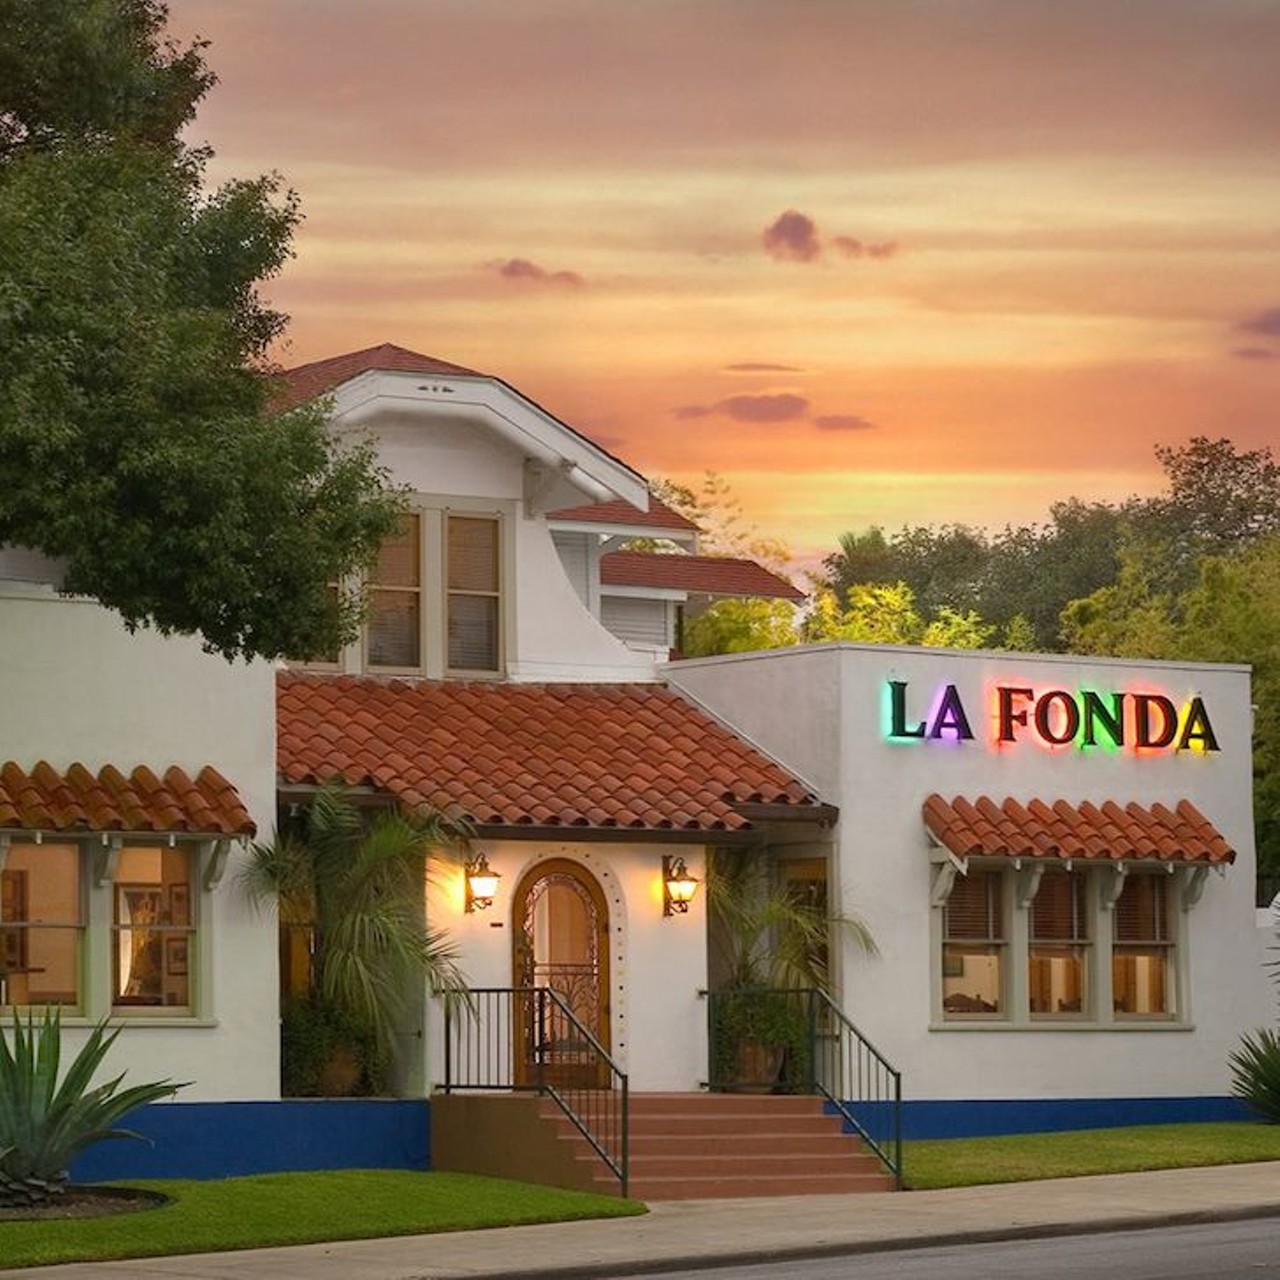 La Fonda On Main
2415 N Main Ave., (210) 733-0621, lafondaonmain.com
This refined mainstay from 1932 is a must in Midtown featuring unique interpretations of Tex-Mex favorites, interior Mexican dishes and a diverse array of amazing house margaritas. It's the perfect spot to entertain visiting family with a taste for the finer things in life. 
Photo via Facebook (La Fonda On Main)